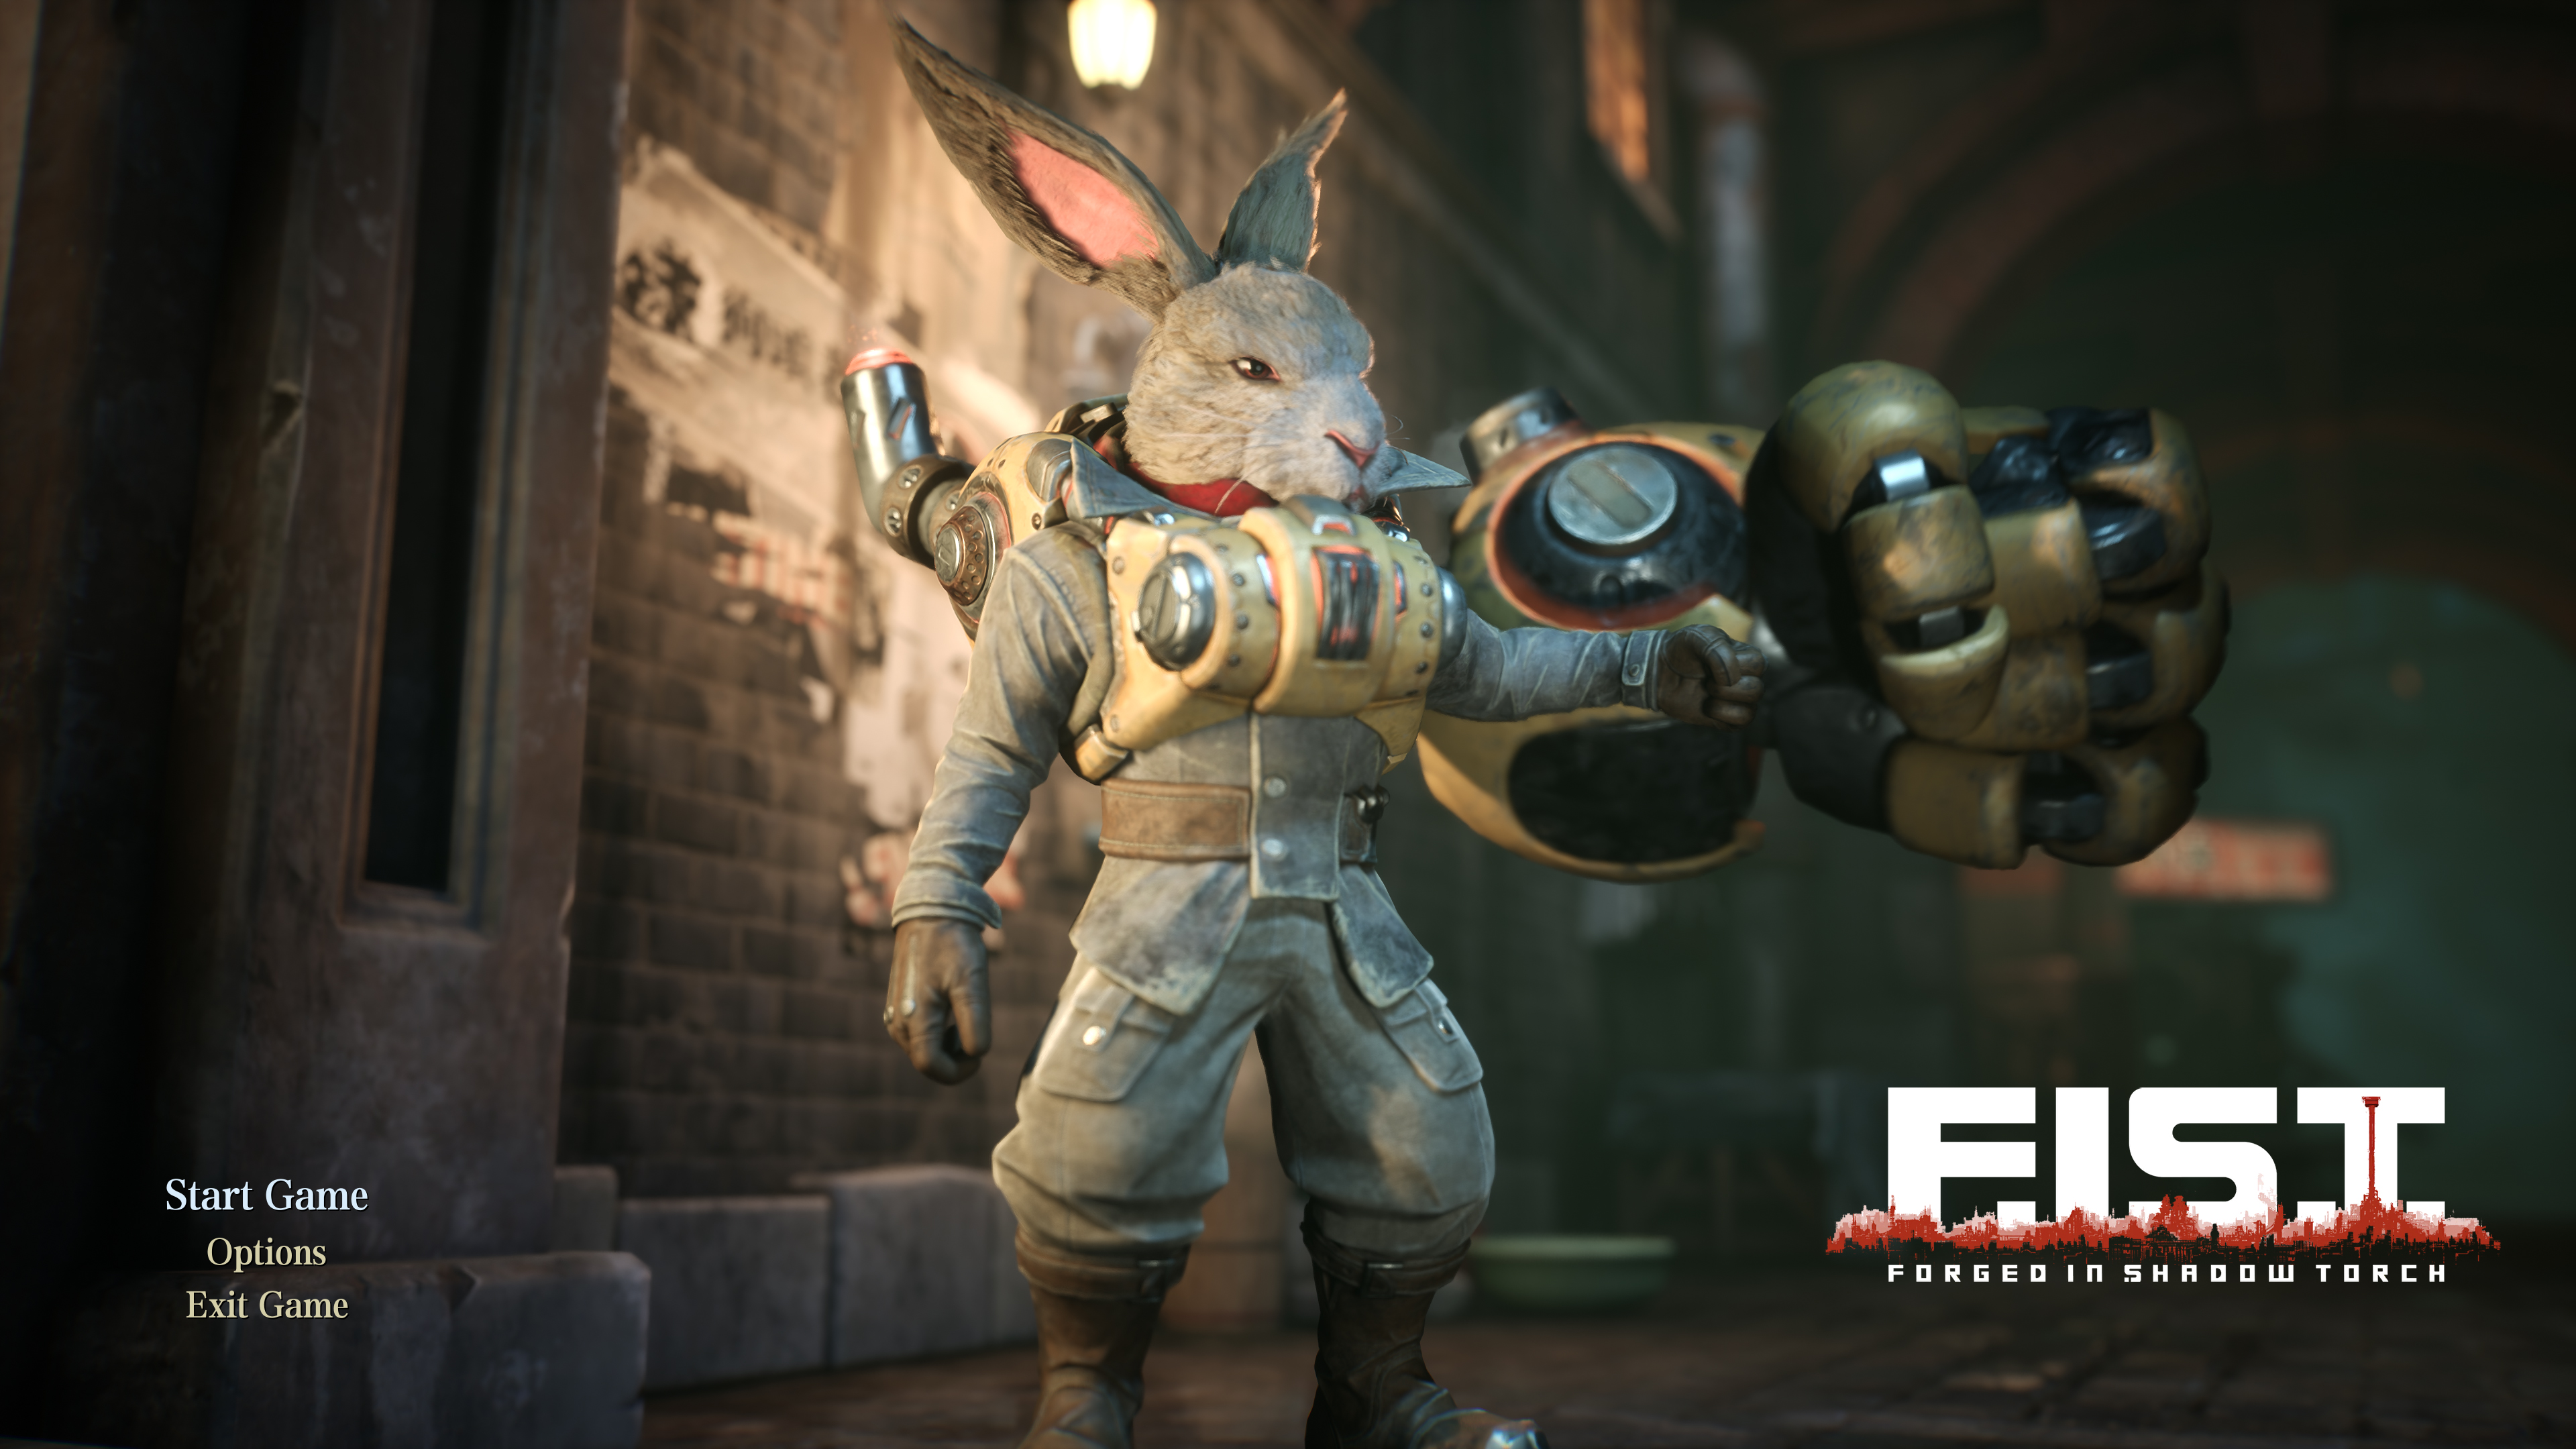 F.I.S.T.: Forged In Shadow Torch Out Now With Up To 3x NVIDIA DLSS  Performance Boost, Ray Tracing, and NVIDIA Reflex | GeForce News | NVIDIA